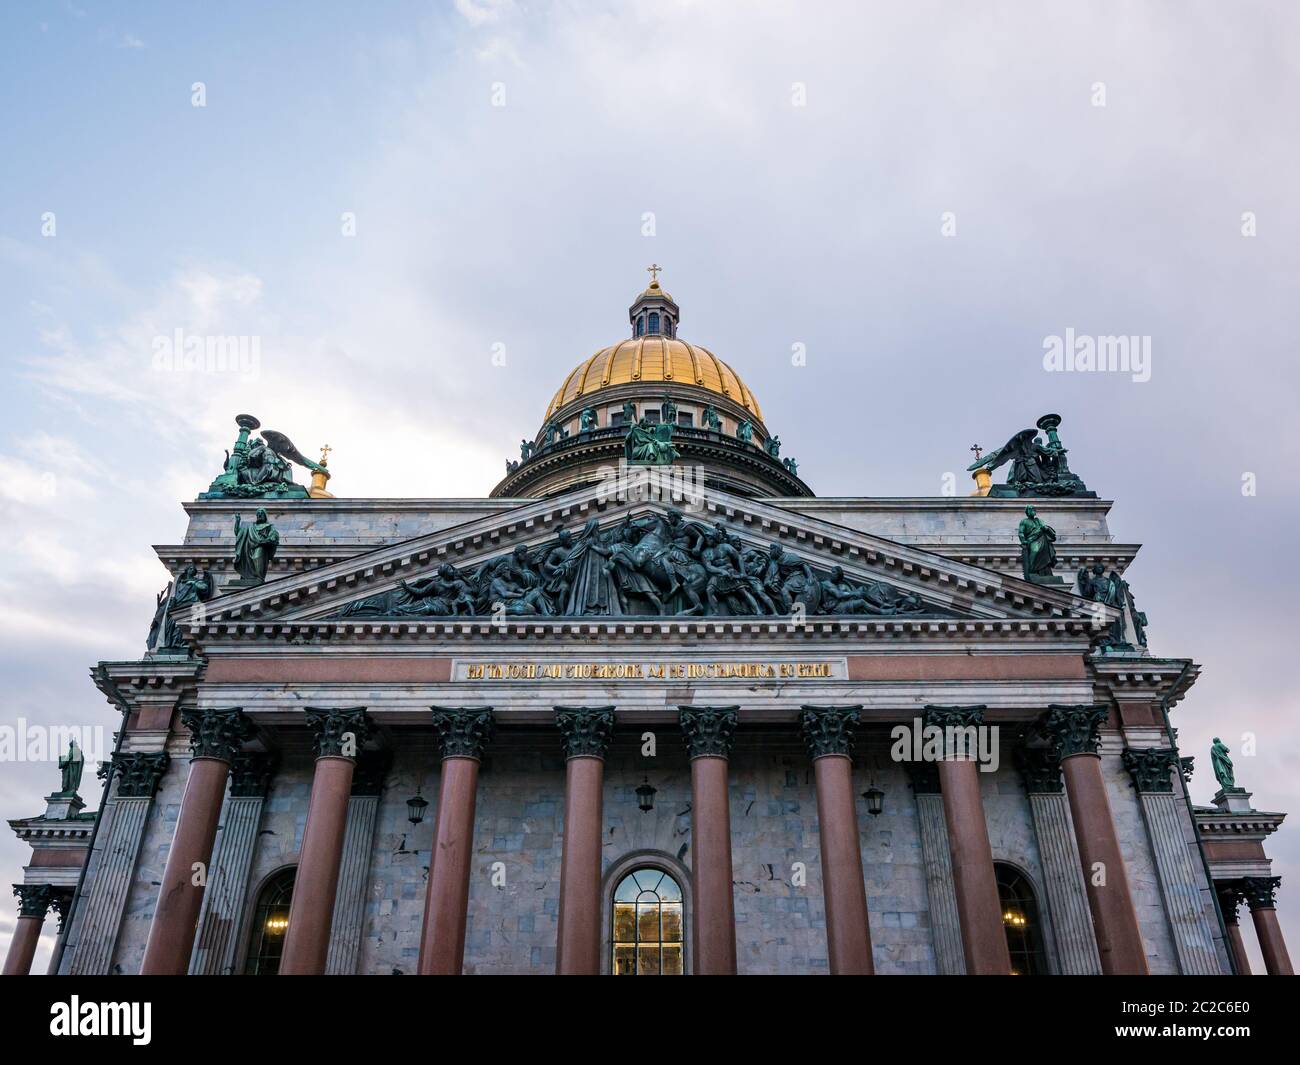 St Isaac's Cathedral grand colonnaded Doric portico facade, St Petersburg, Russia Stock Photo